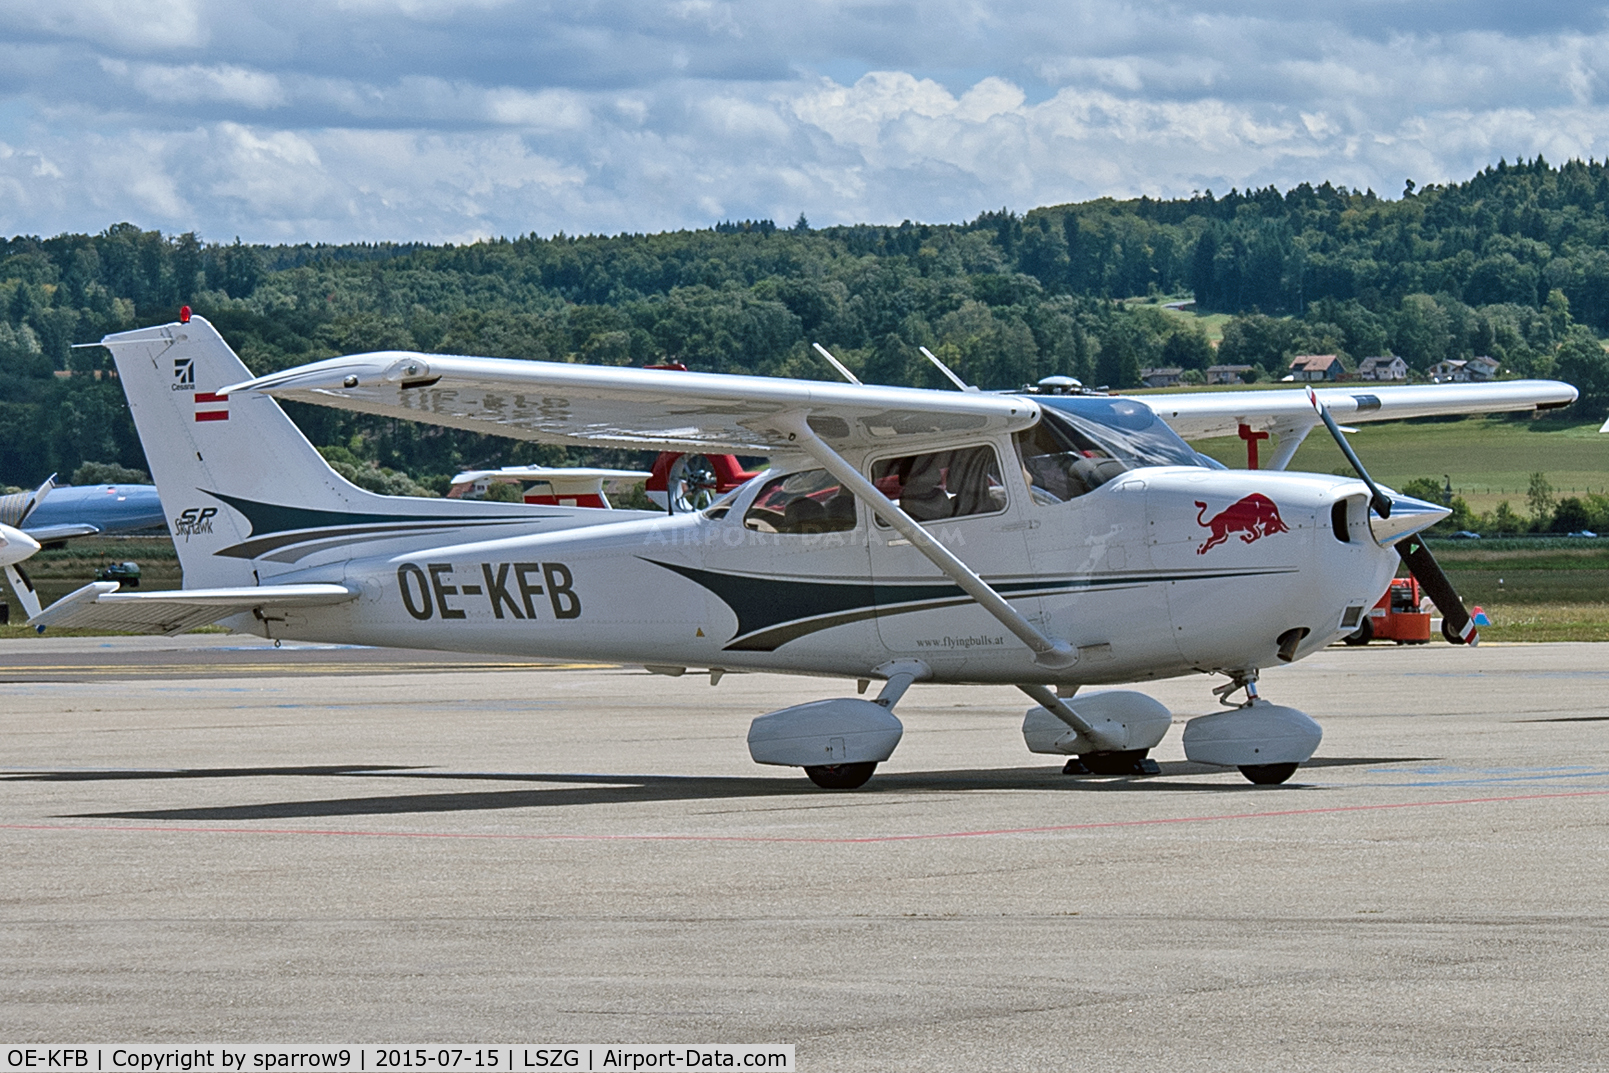 OE-KFB, 2004 Cessna 172S C/N 172S9584, At Grenchen airport